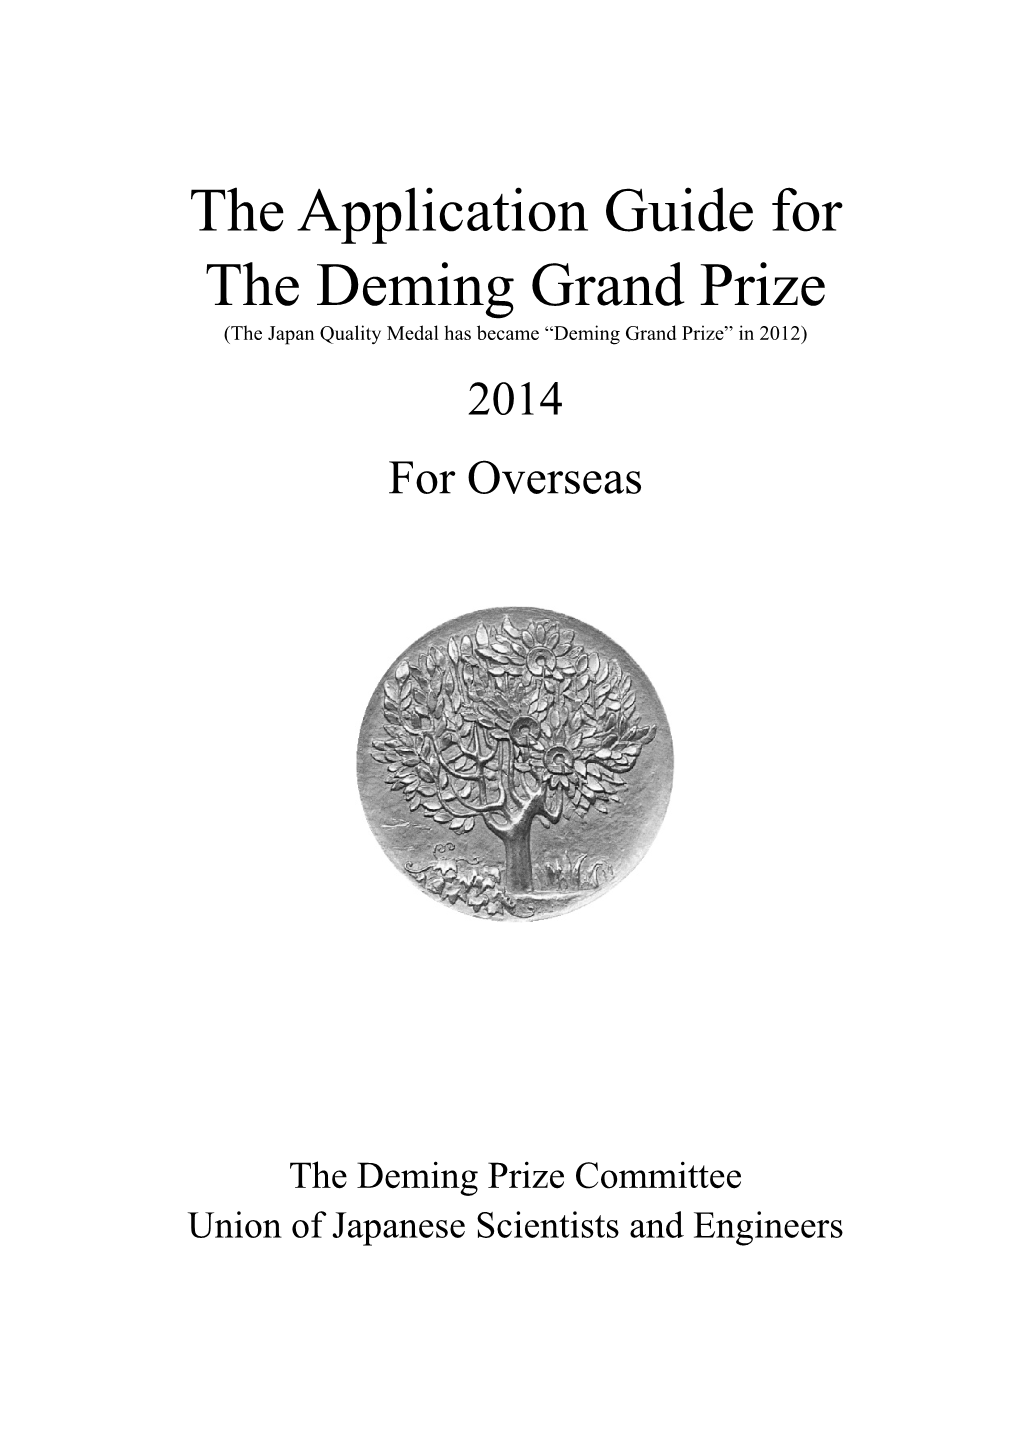 The Application Guide for the Deming Grand Prize Contents